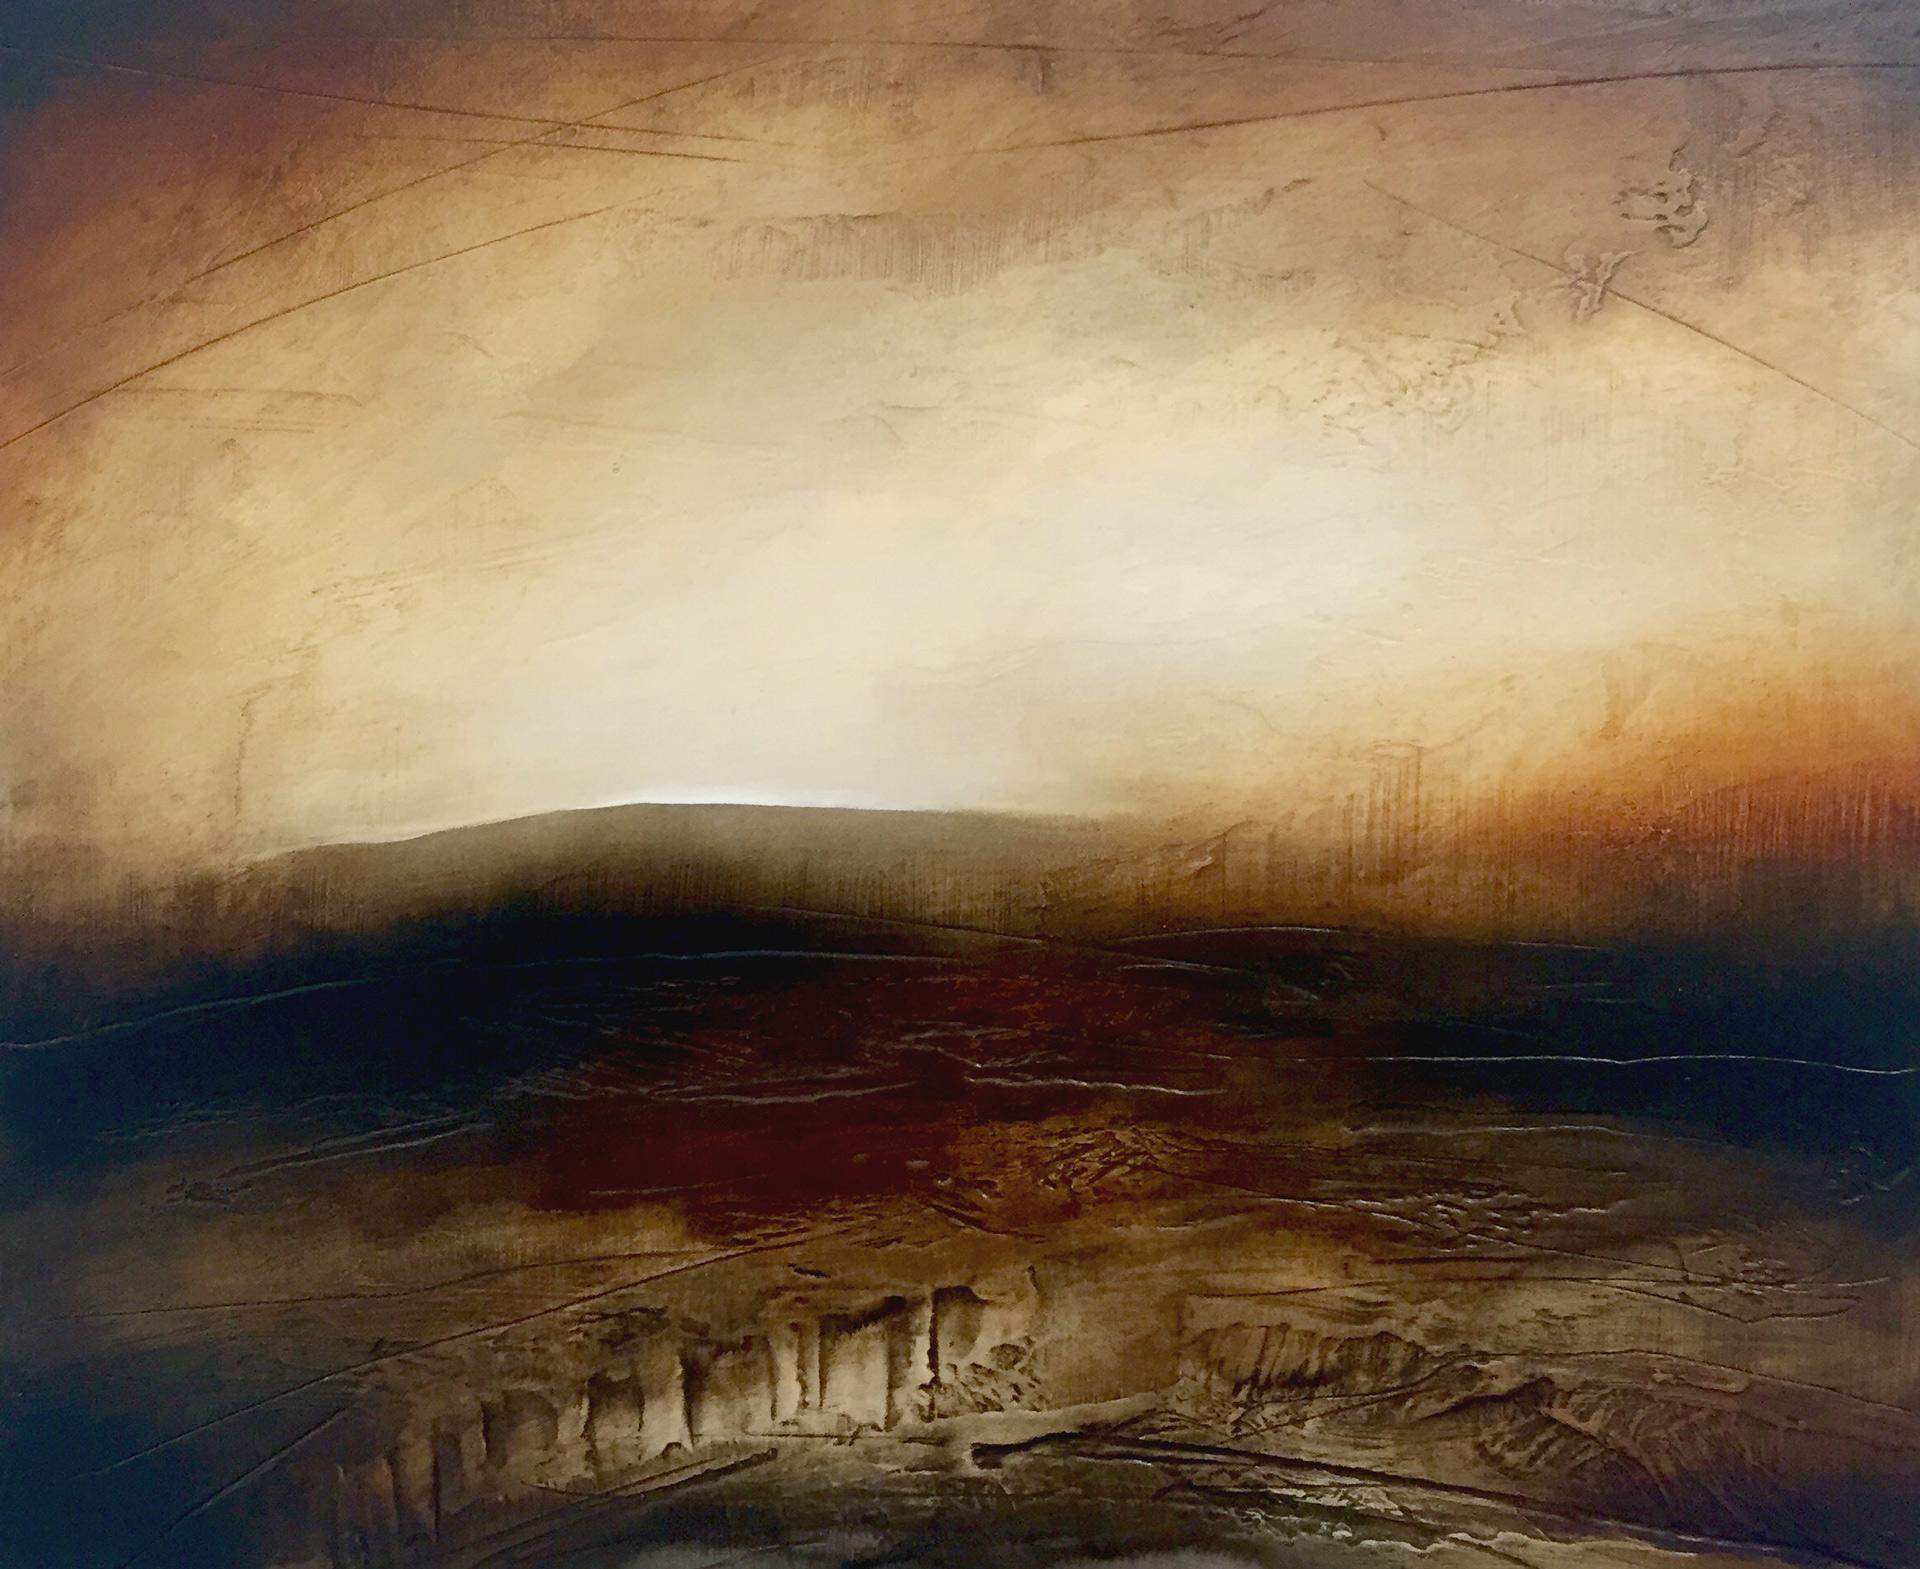 Atmospheric Abstract Landscape Painting of British Moorland with Earthy Tones